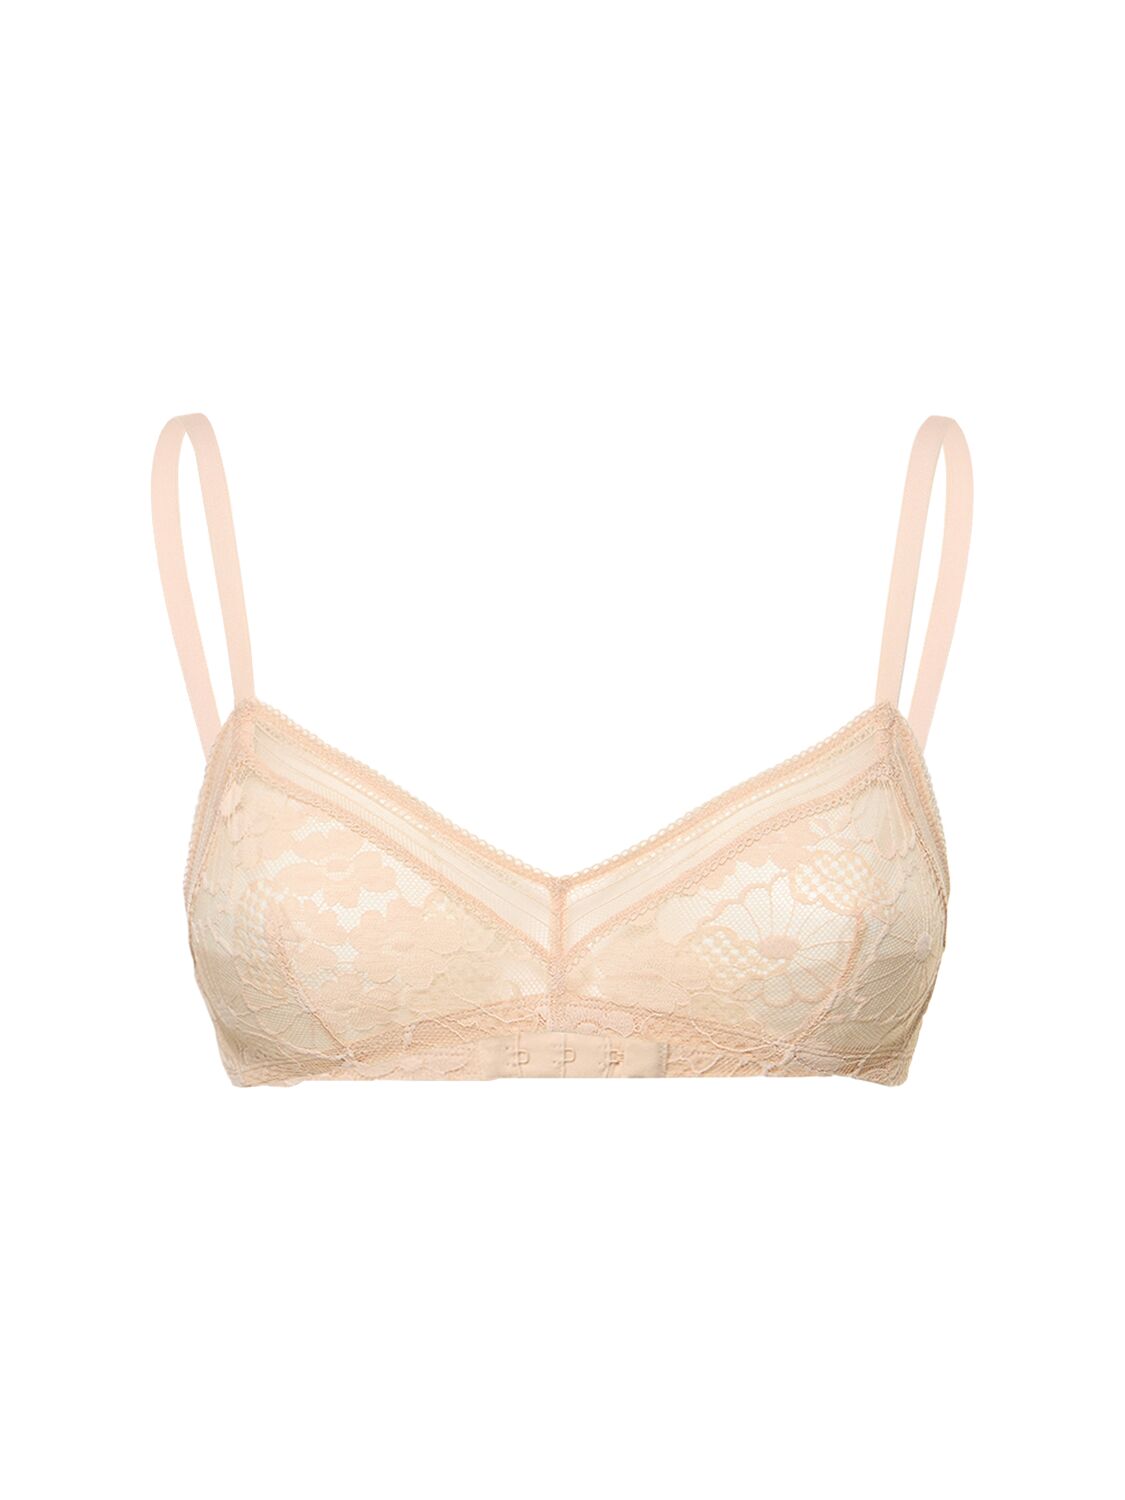 ERES Courbe Wireless Triangle Bra in Make Up